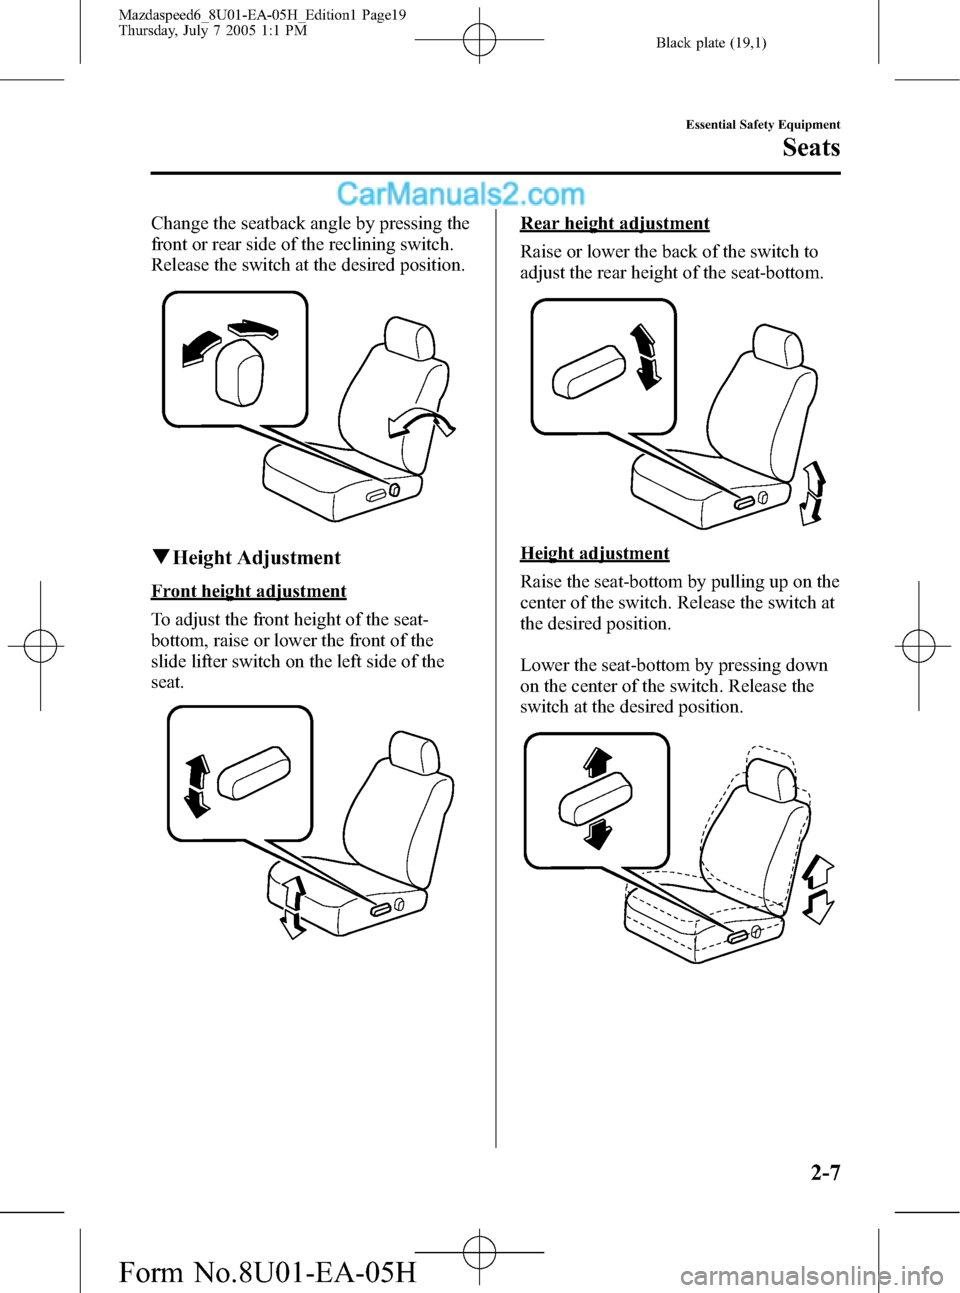 MAZDA MODEL MAZDASPEED 6 2006   (in English) User Guide Black plate (19,1)
Change the seatback angle by pressing the
front or rear side of the reclining switch.
Release the switch at the desired position.
qHeight Adjustment
Front height adjustment
To adjus